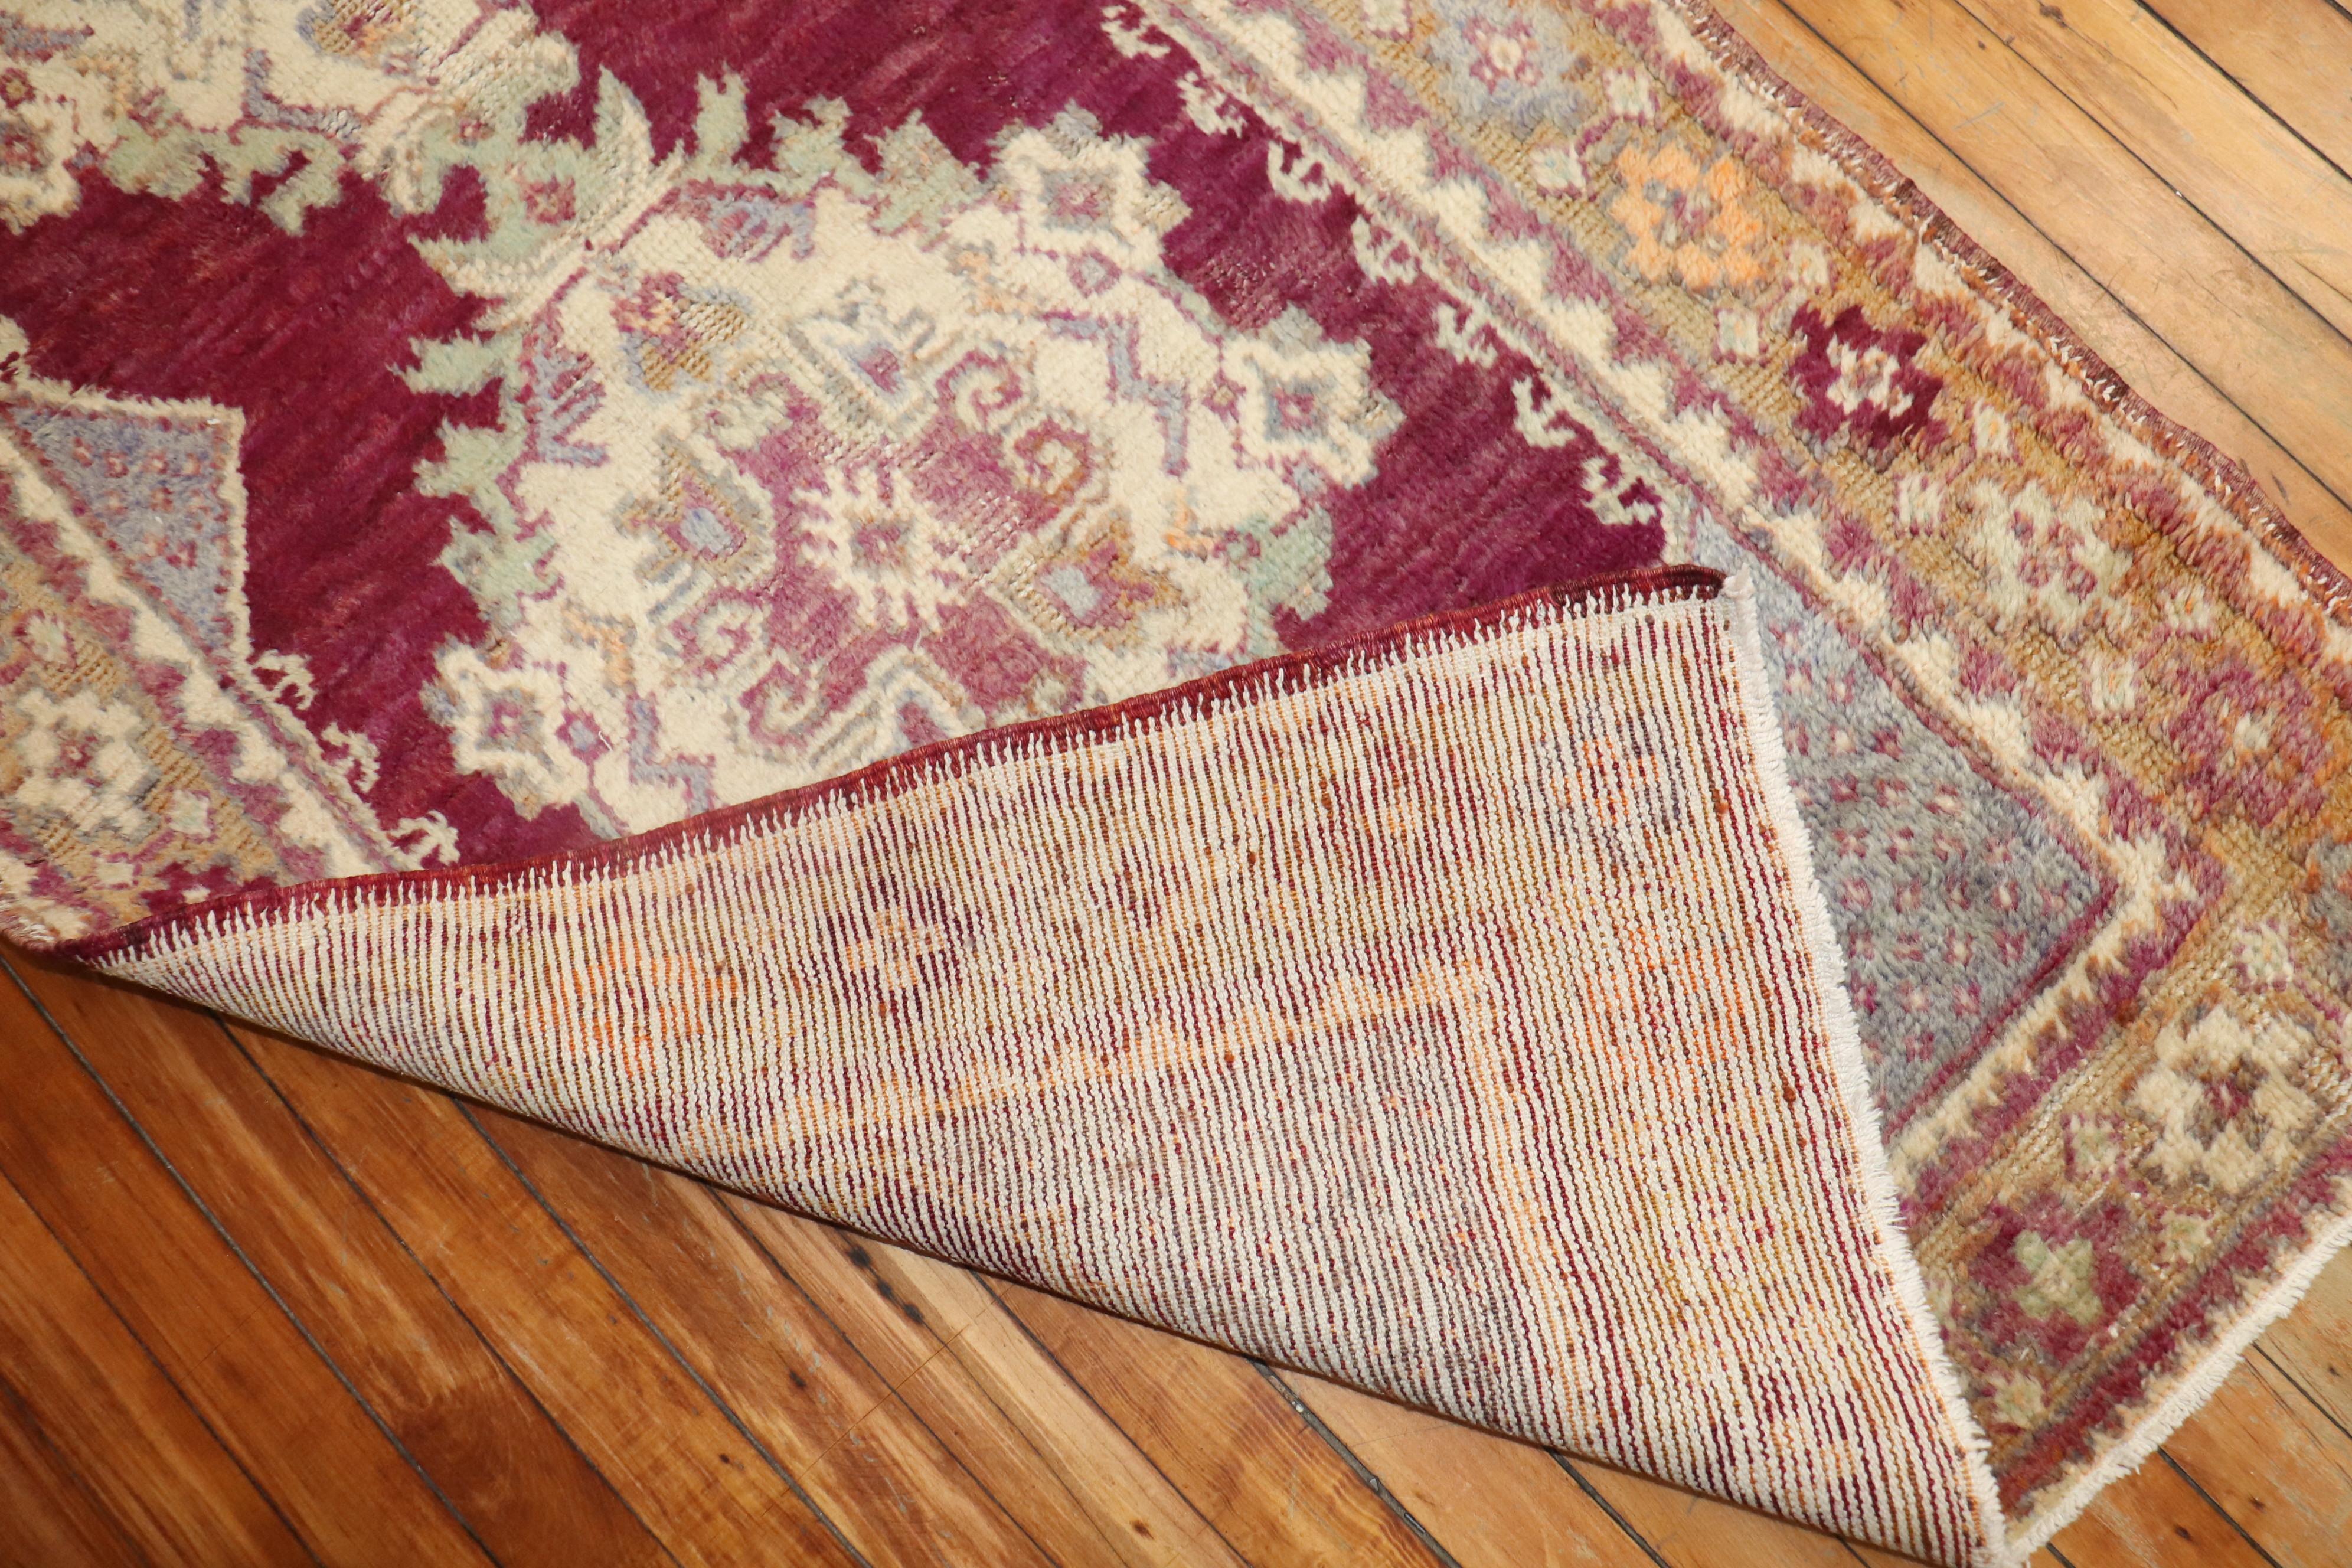 Mid-20th century wool Turkish runner with a geometric design on a deep purple field. 

Measures: 2'10''x 9'10